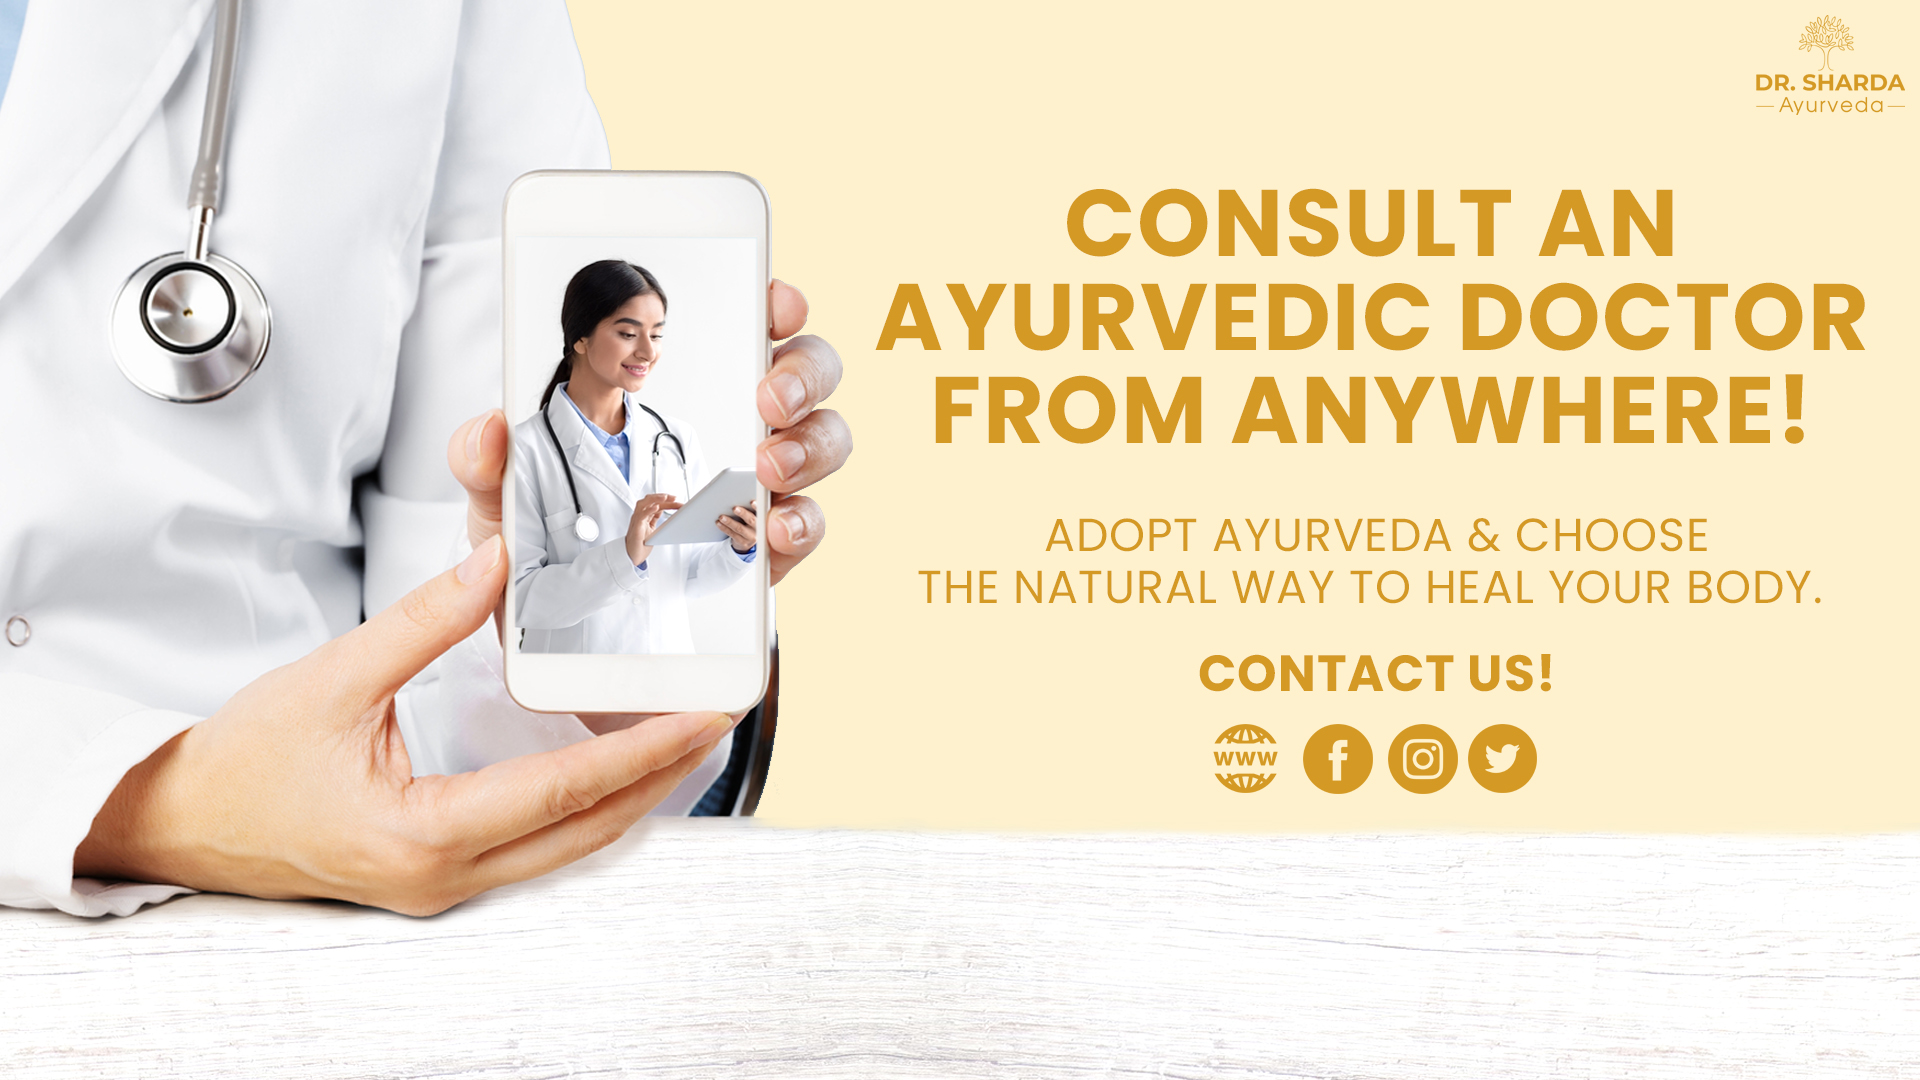 DR. SHARDA
Ayurveda

CONSULT AN
. AYURVEDIC DOCTOR
» FROM ANYWHERE!

ADOPT AYURVEDA & CHOOSE
THE NATURAL WAY TO HEAL YOUR BODY.

CONTACT US!

£000